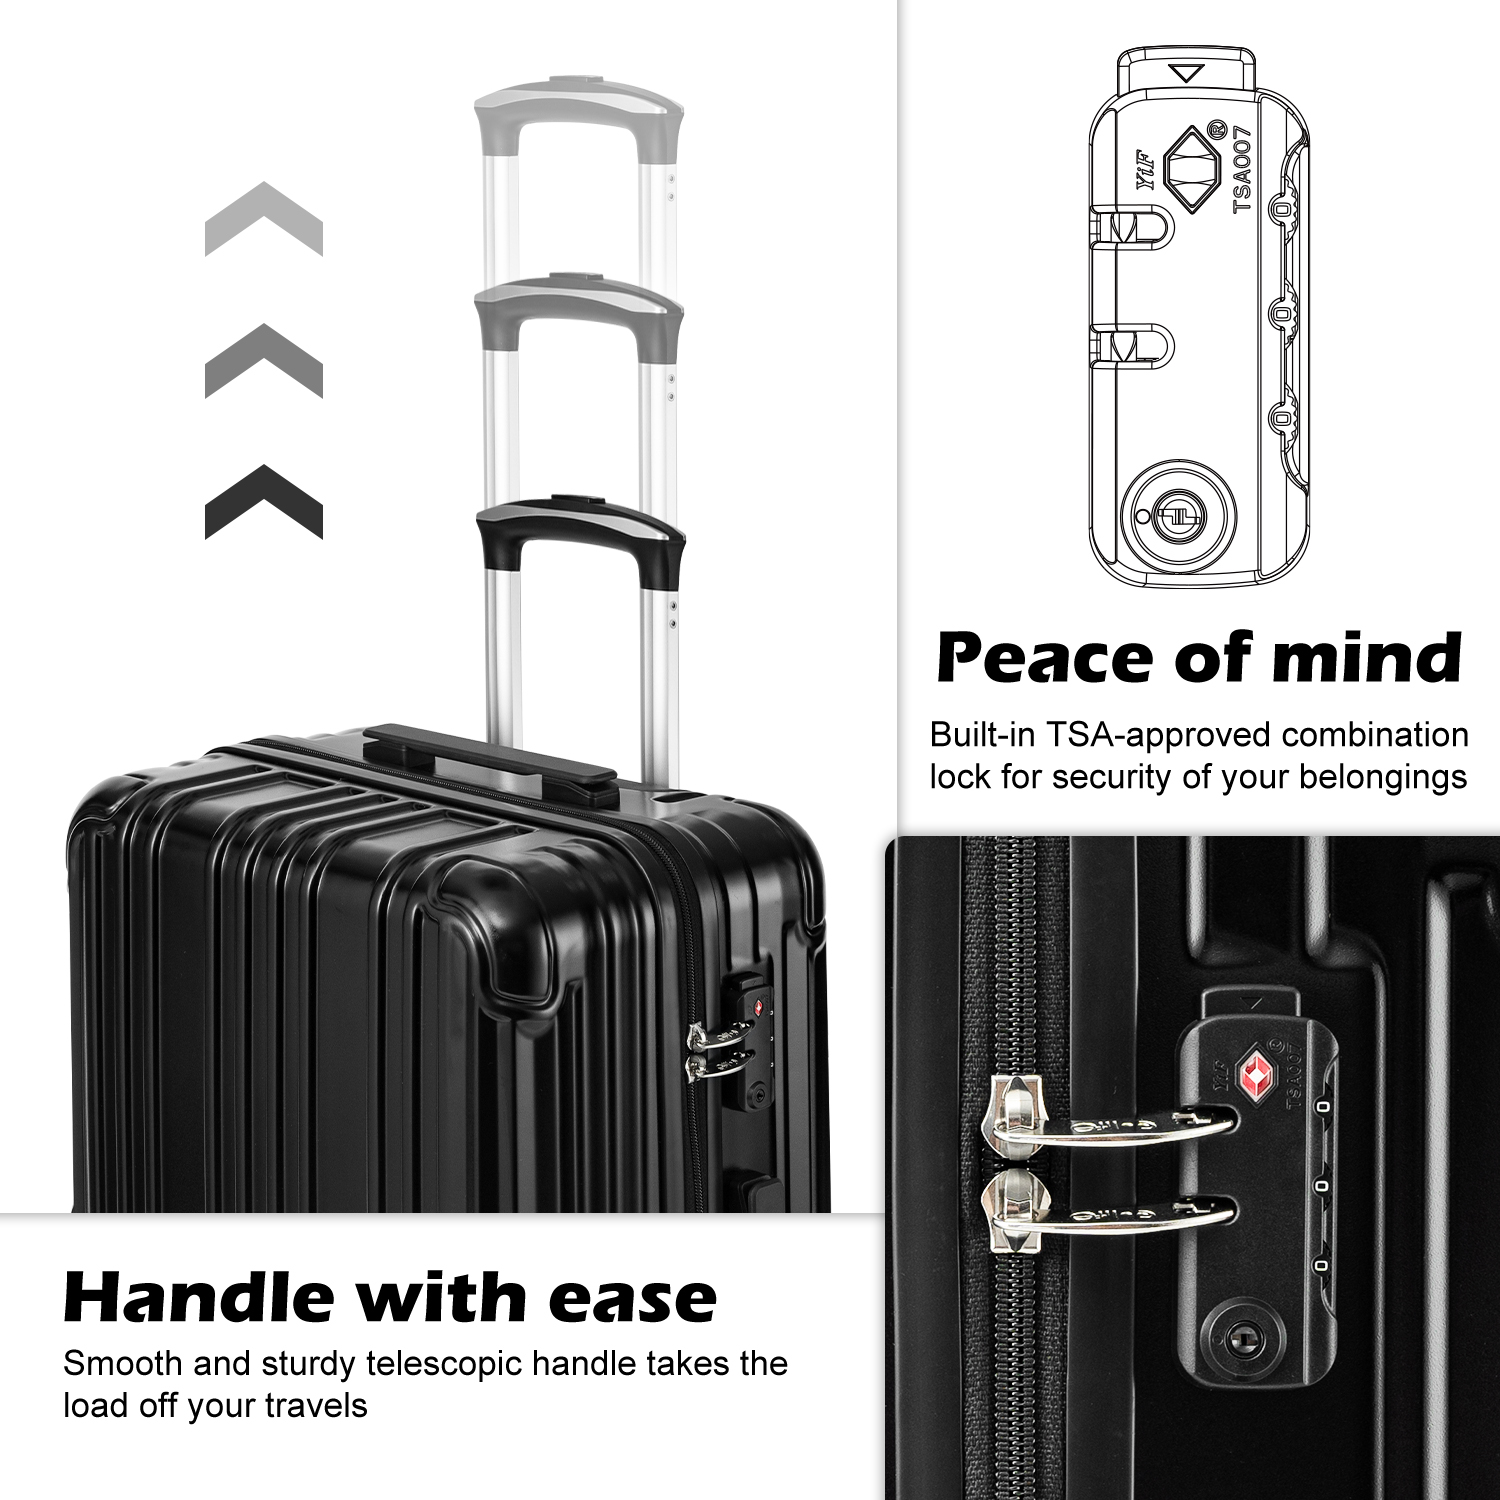 COOLIFE Luggage Expandable Suitcase PC+ABS 3 Piece Set with TSA Lock Spinner Carry on 20in24in28in YD80